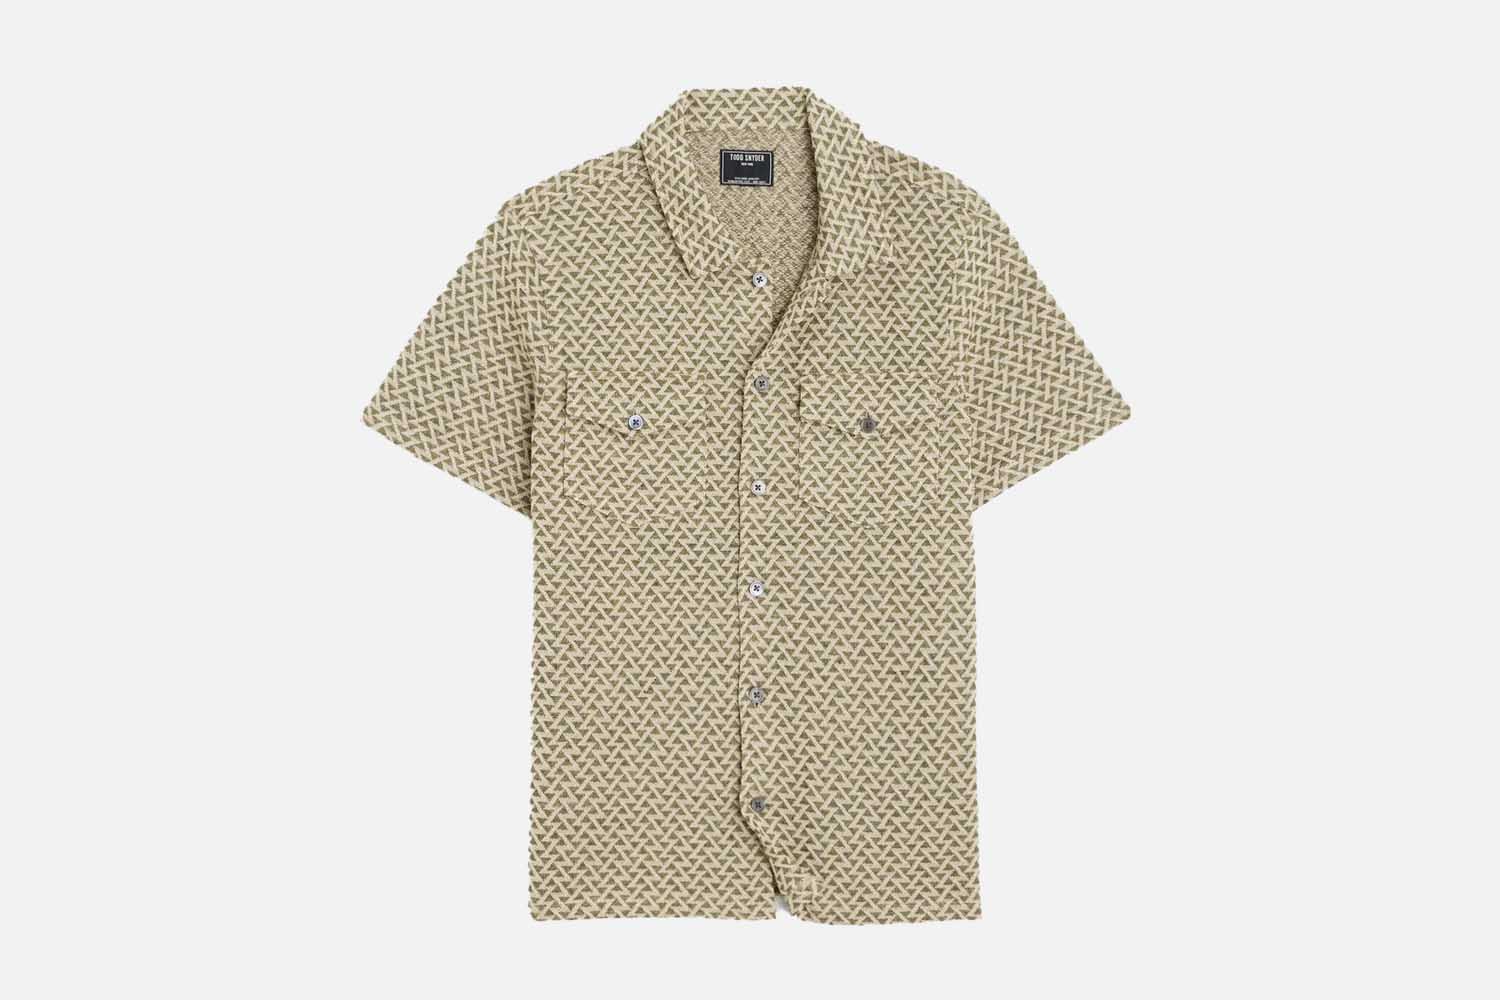 Todd Snyder Knit Jacquard Polo Shirt in Faded Surplus